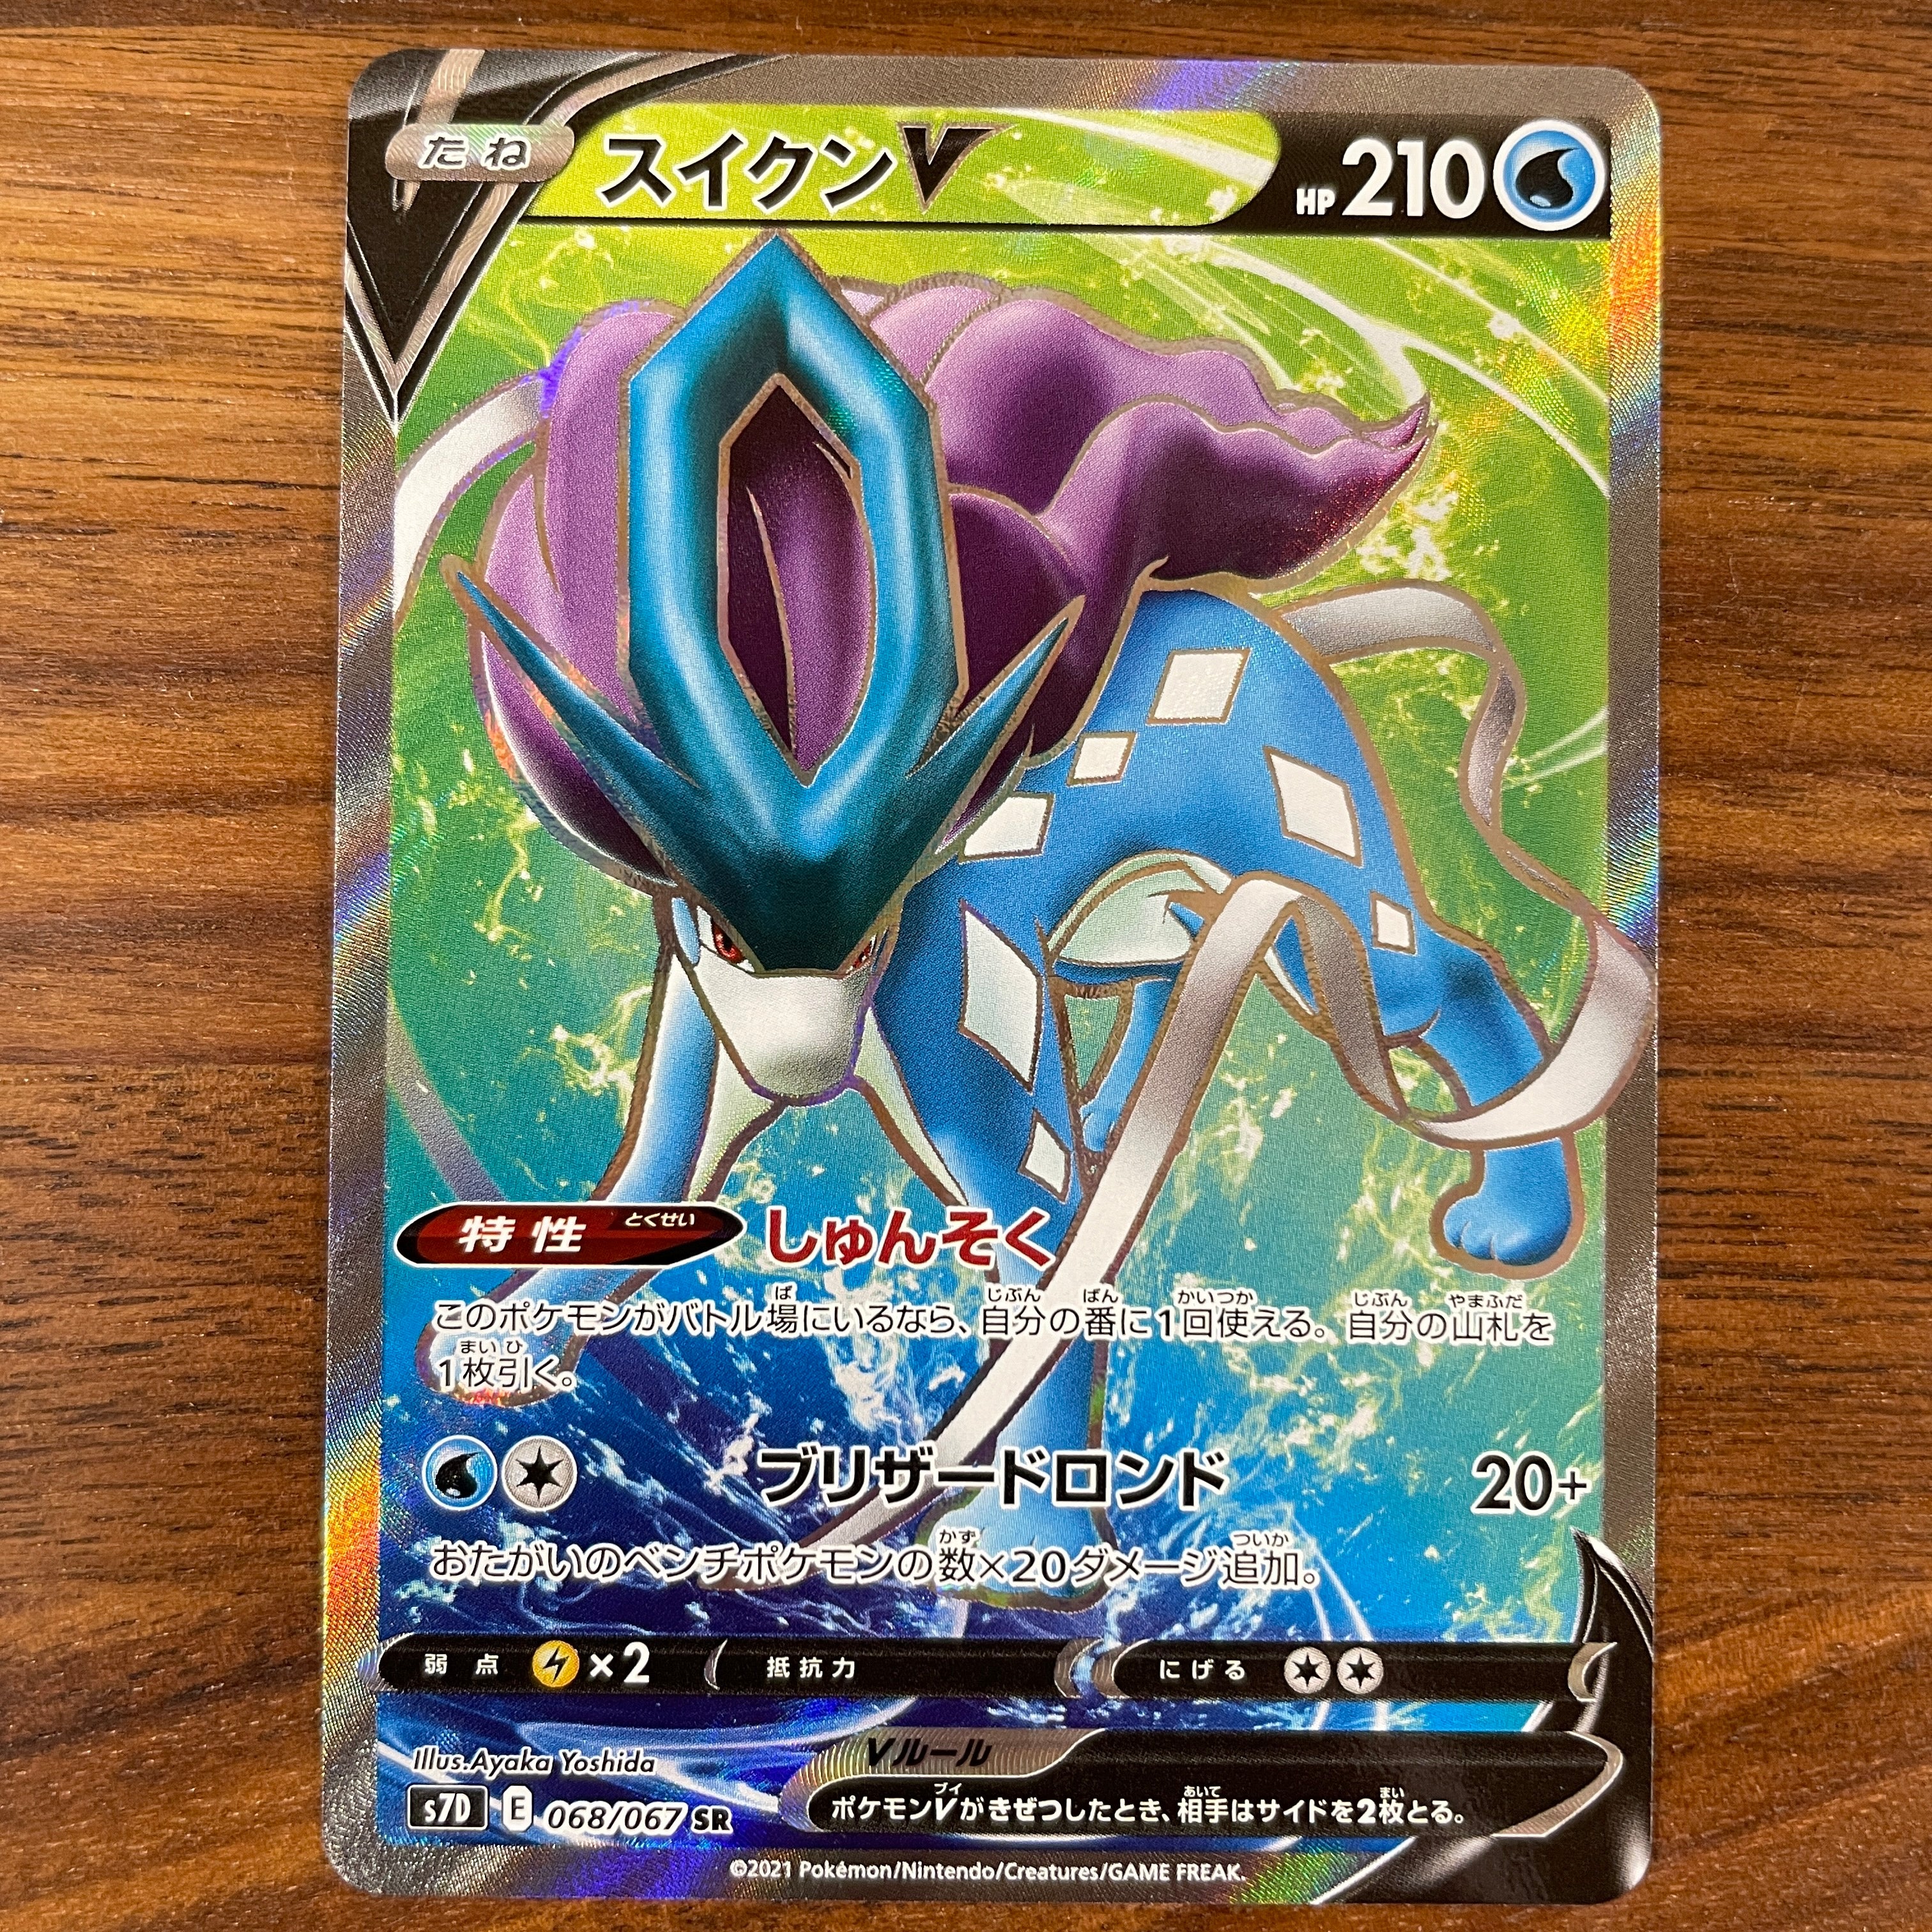 POKÉMON CARD GAME Sword & Shield Expansion pack ｢Skyscraping Perfect｣  POKÉMON CARD GAME S7D 068/069 Super Rare card  Suicune V